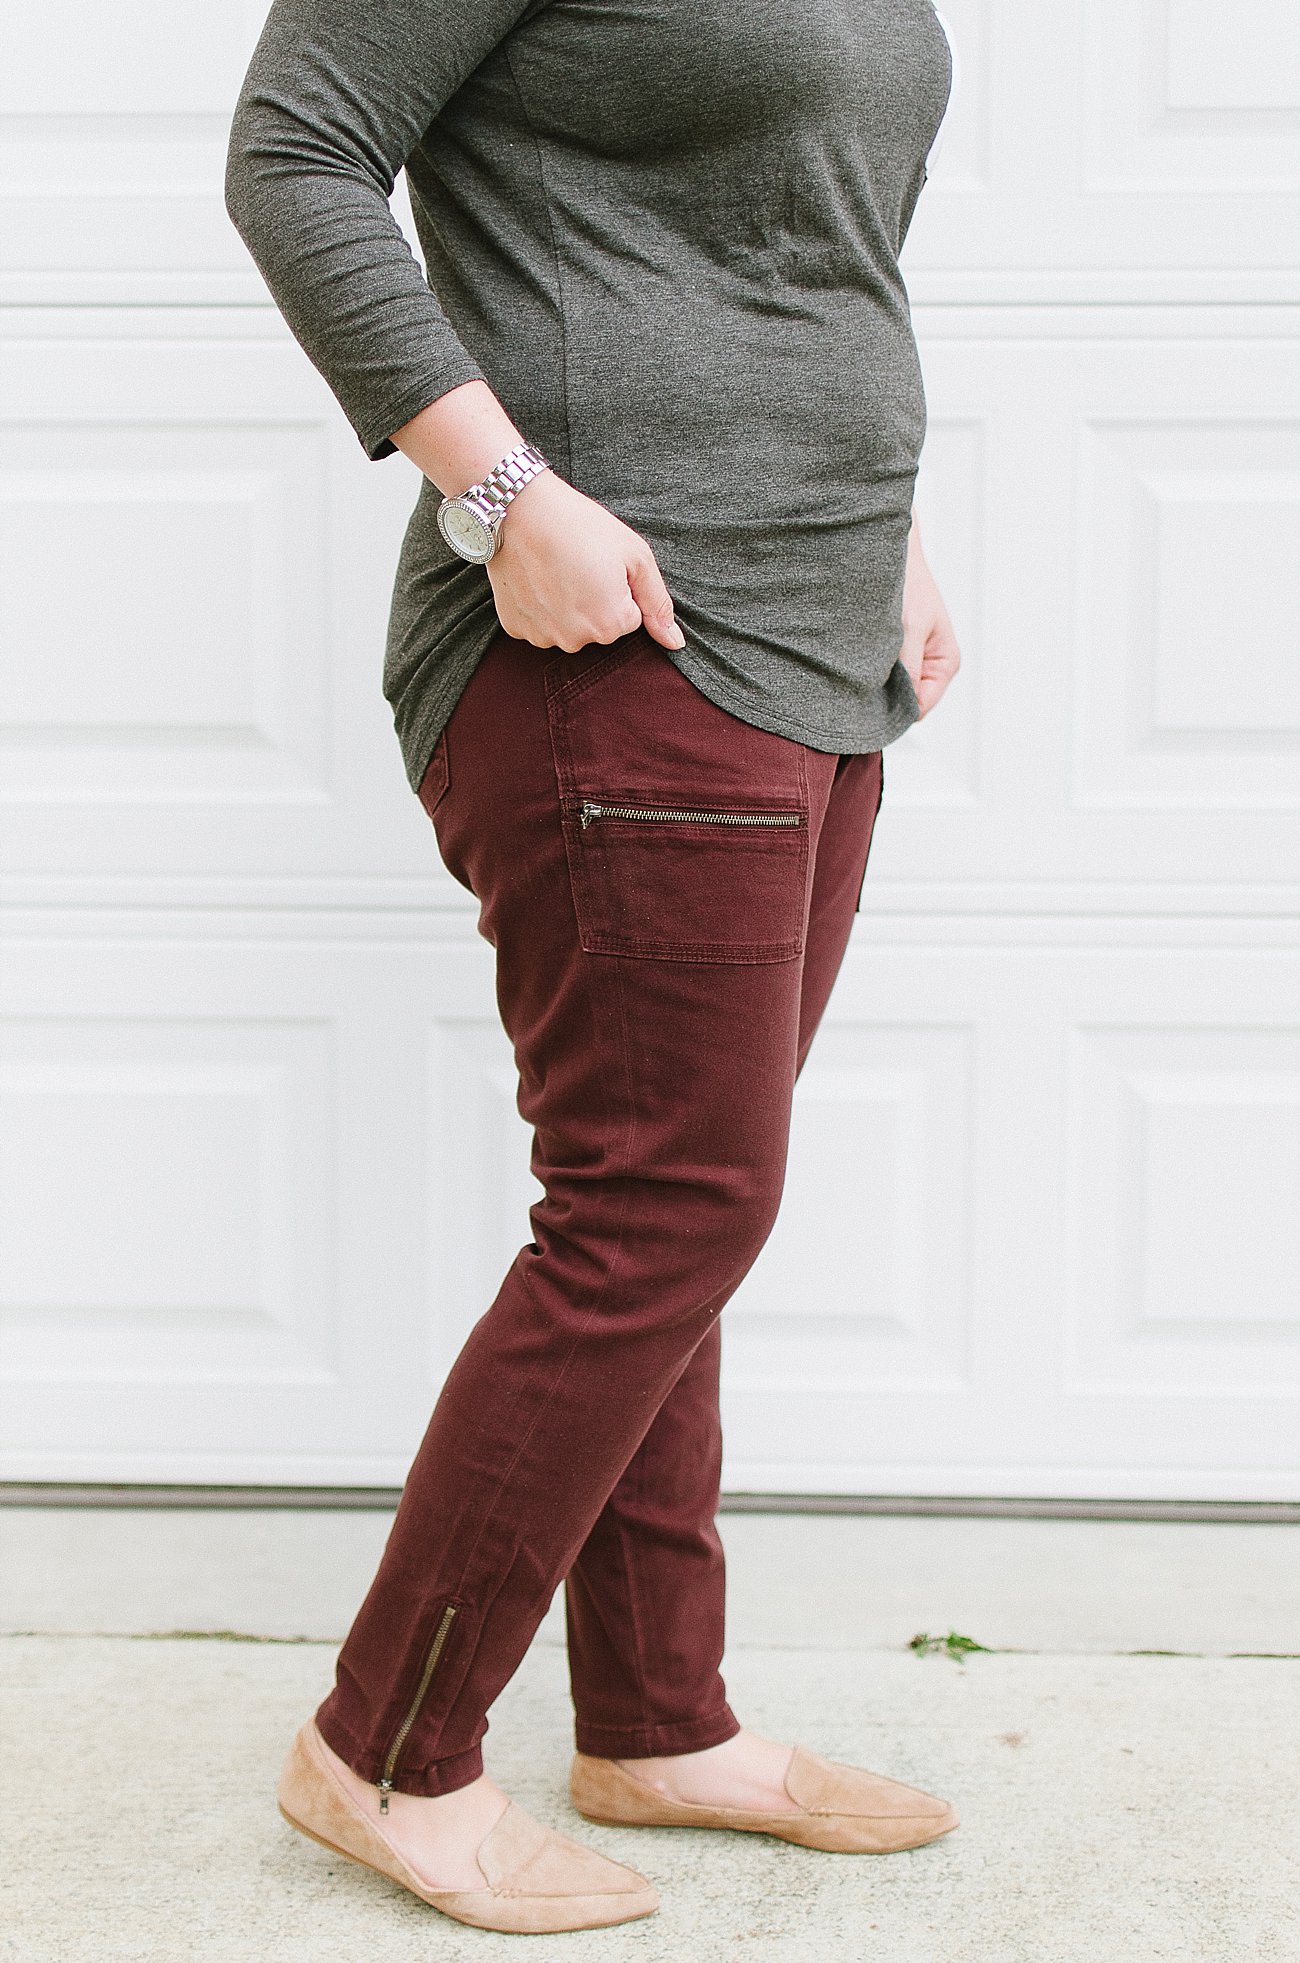 Stitch Fix Review #33 - Kut from the Kloth "Theresa Zipper Detail Cargo Skinny Pant" - Size 14 and Steve Madden "Feather Pointed Toe Loafer" - Size 8